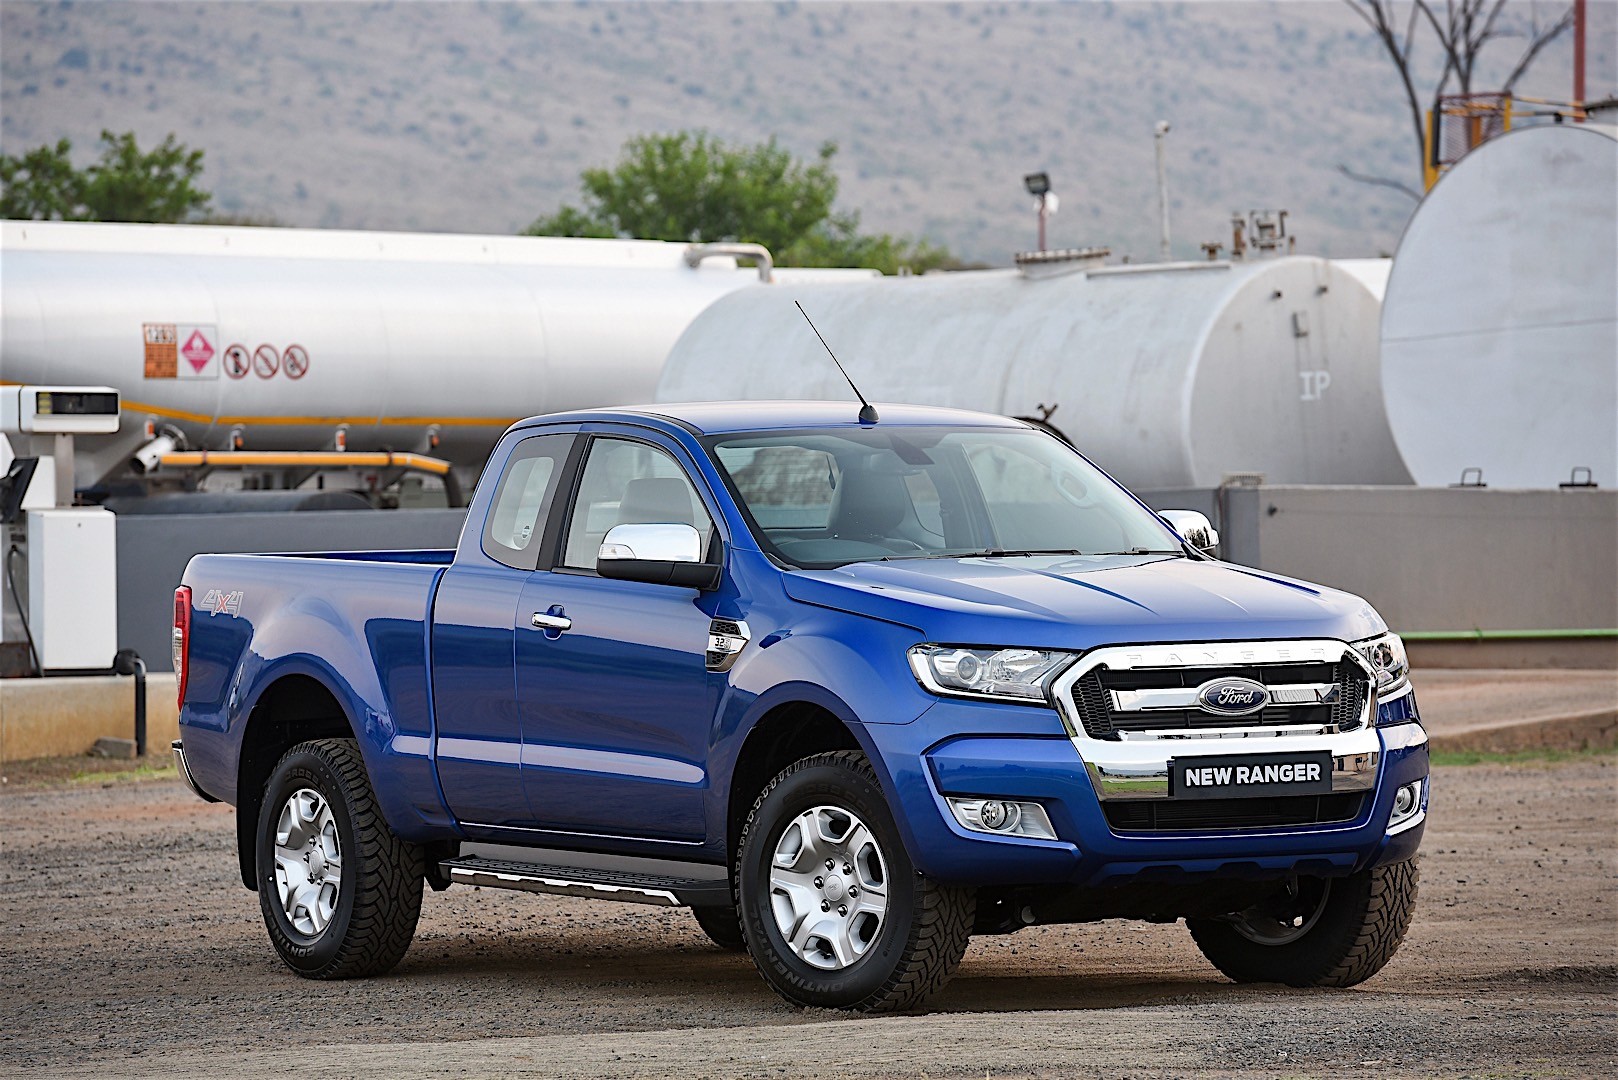 2020 Ford Ranger Bed Size Cars